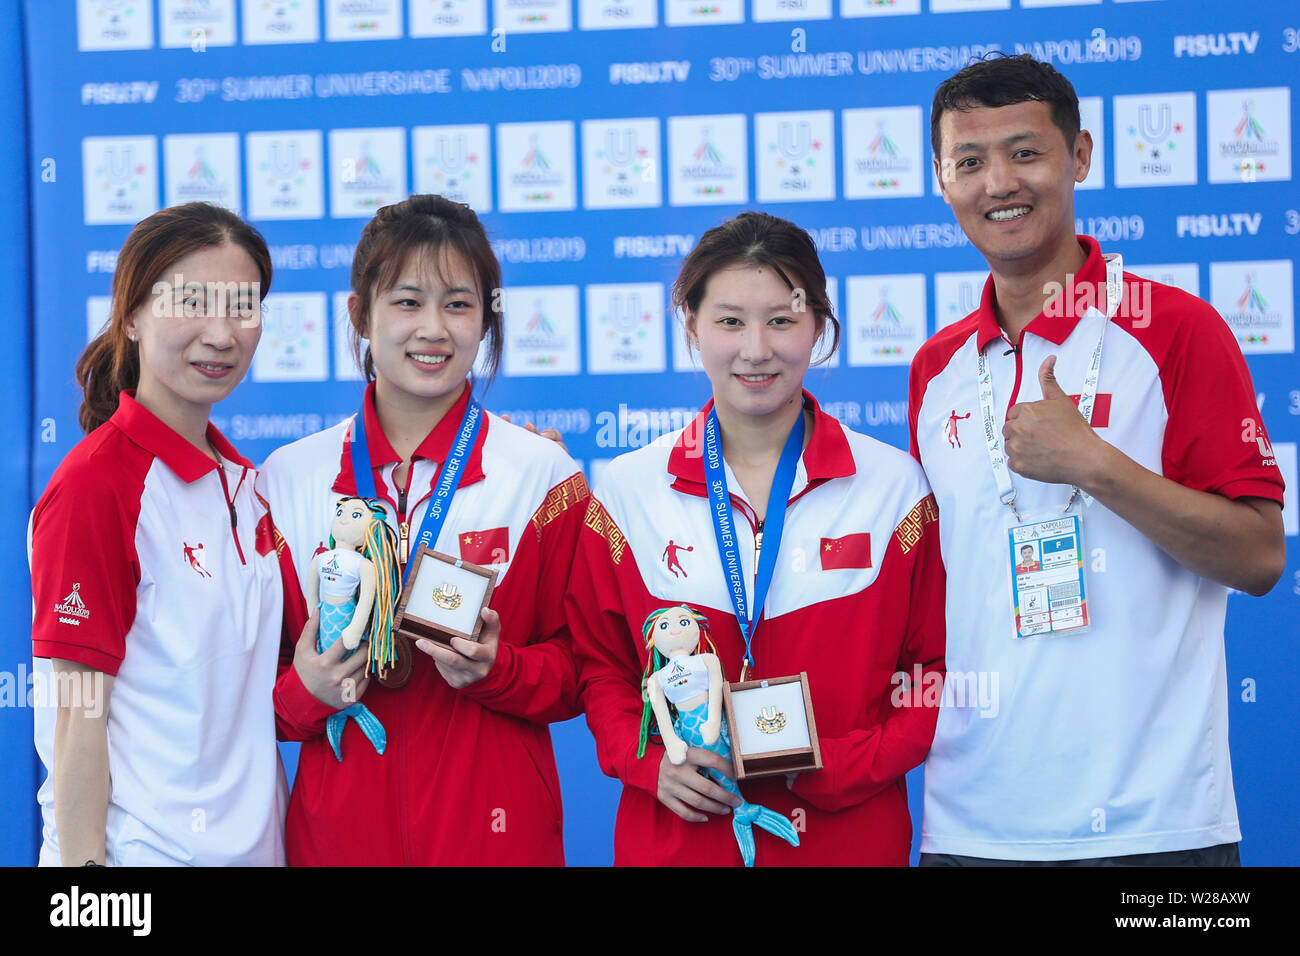 Naples, Italy. 6th July, 2019. Gold medalists Jiao Jingjing (2nd R) /Wu Jiao (2nd L) of China and their coaches Cheng Jingjing (1st L) and Yan Hui (1st R) pose after the medal ceremony of women's 10m synchronised platform diving at the 30th Summer Universiade in Naples, Italy, July 6, 2019. Credit: Zheng Huansong/Xinhua/Alamy Live News Stock Photo